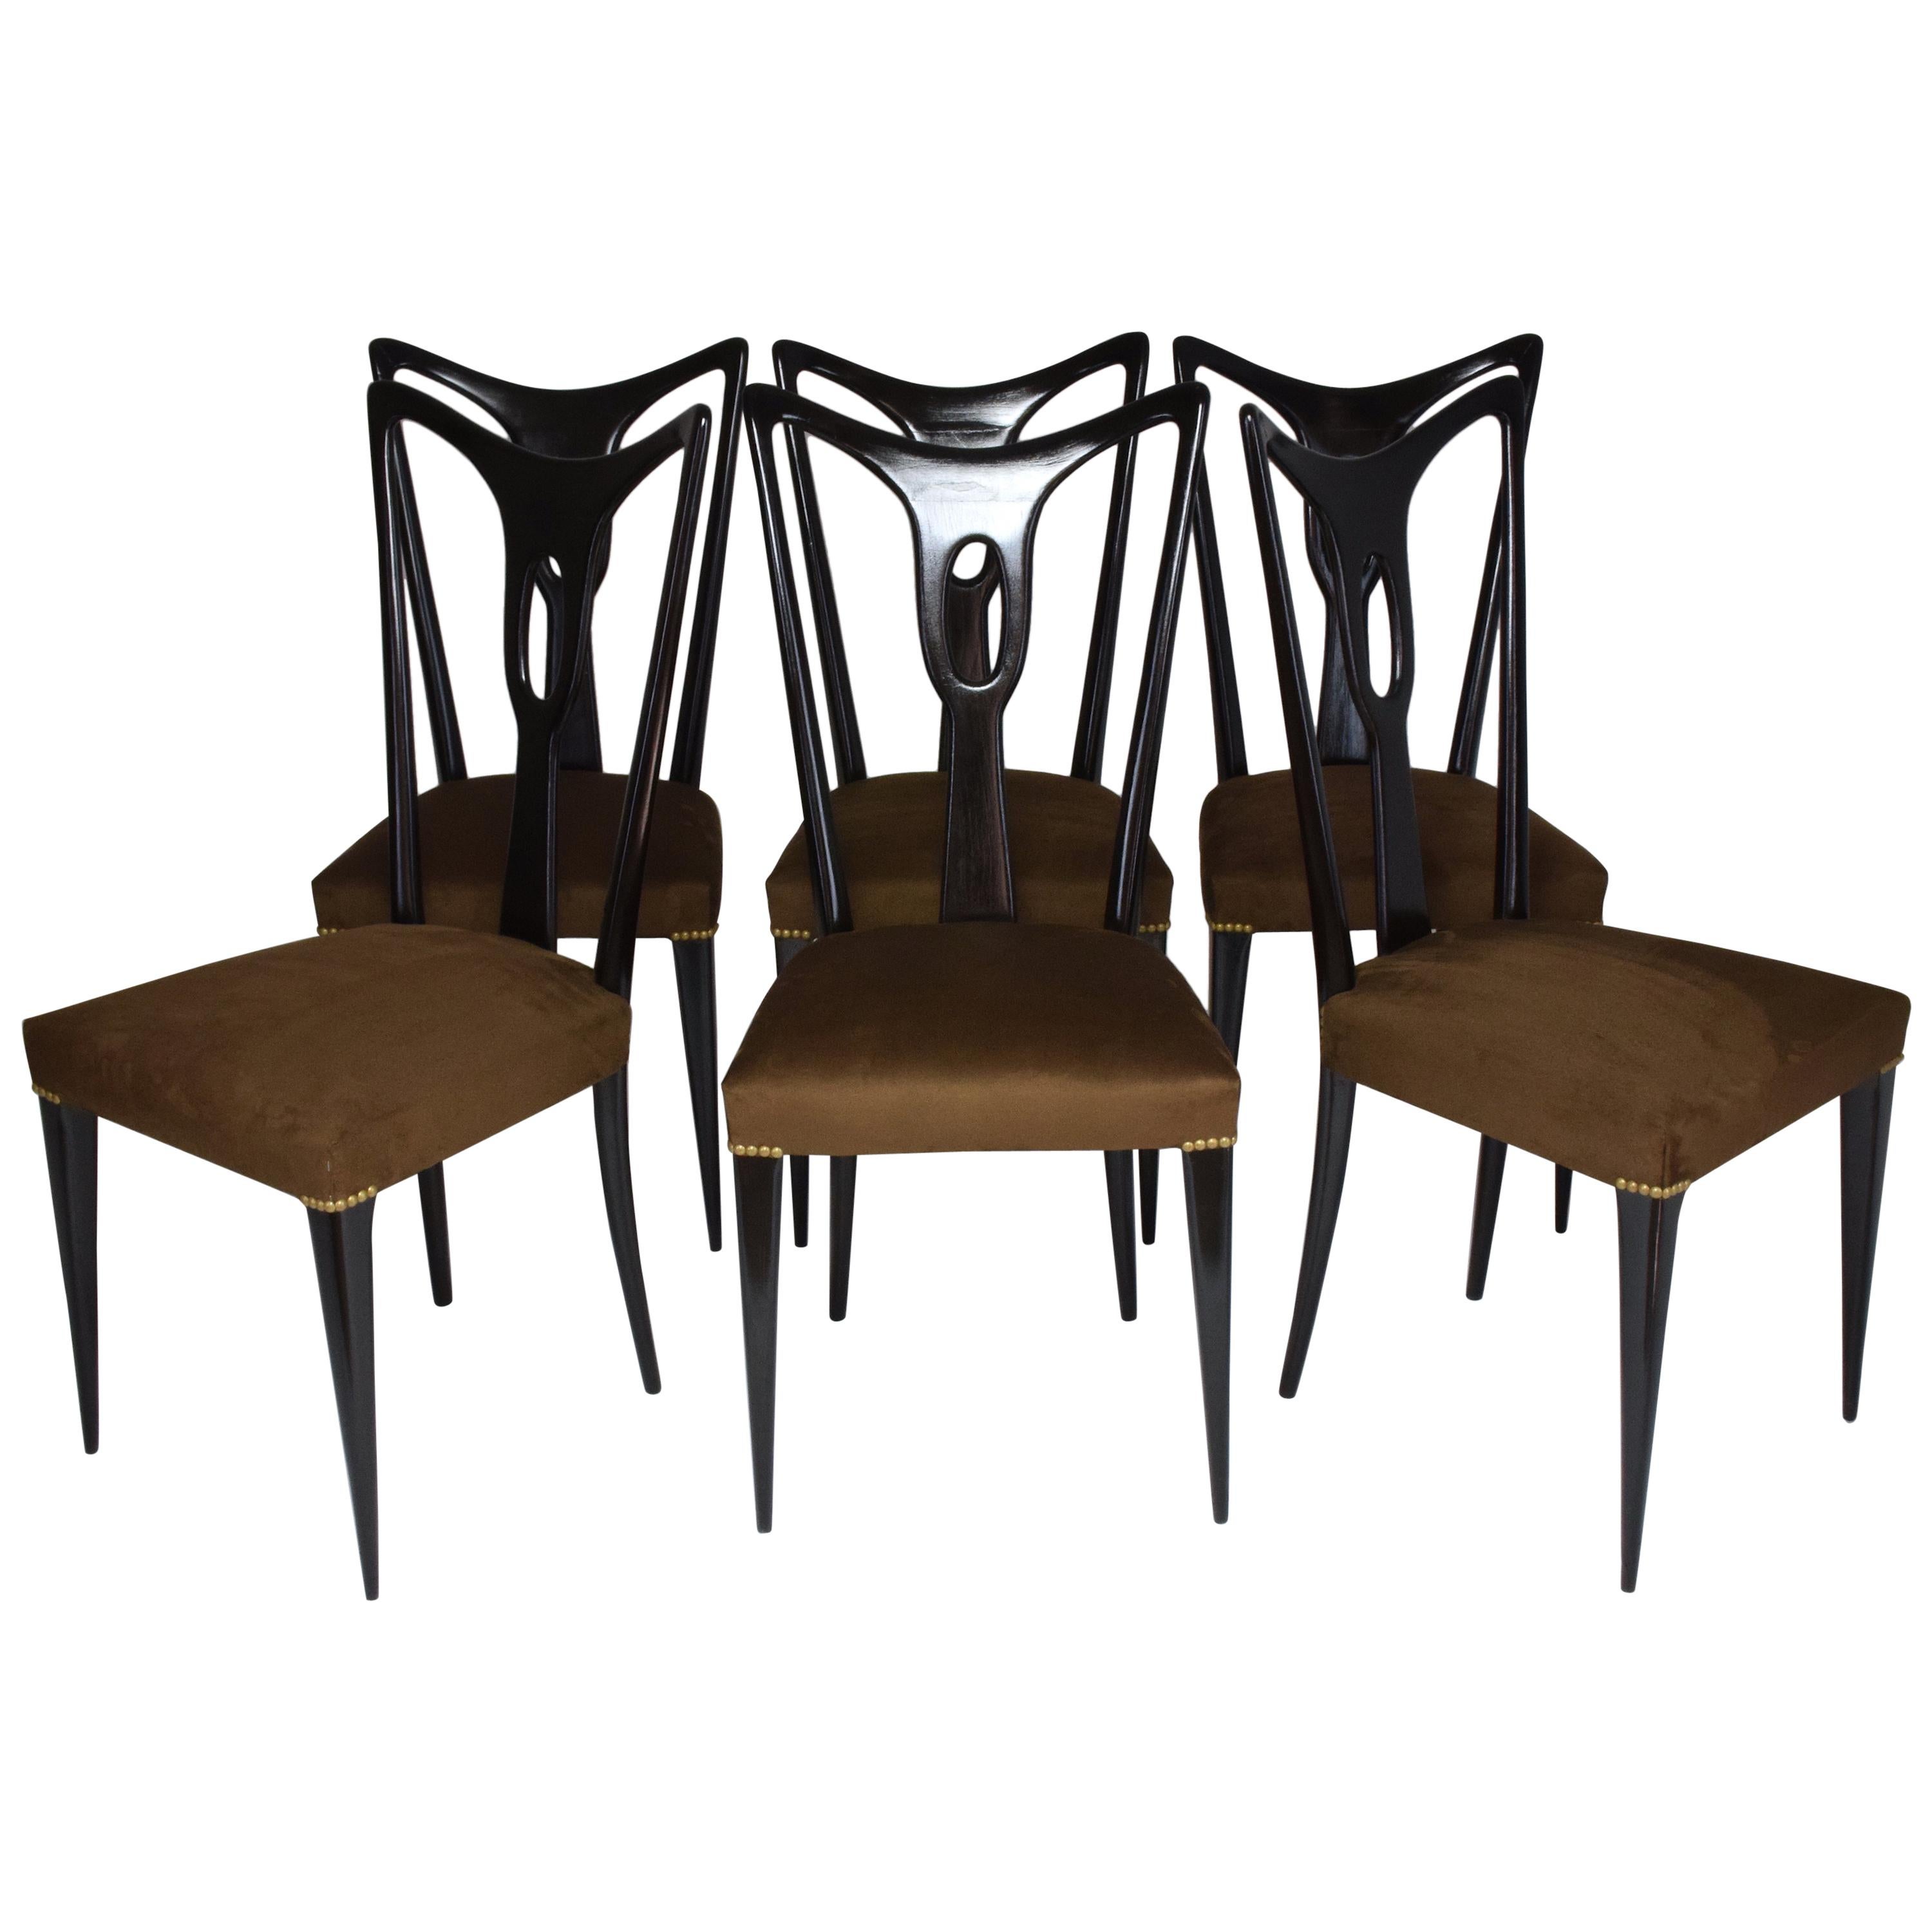 Set of six 20th century vintage dining chairs designed by Guglielmo Ulrich circa 1940s in fully restored condition composed of ebonized wood and re-upholstered with new brass nailhead trim and in a brown fabric.
Italy, circa 1950s.
 ----
All our